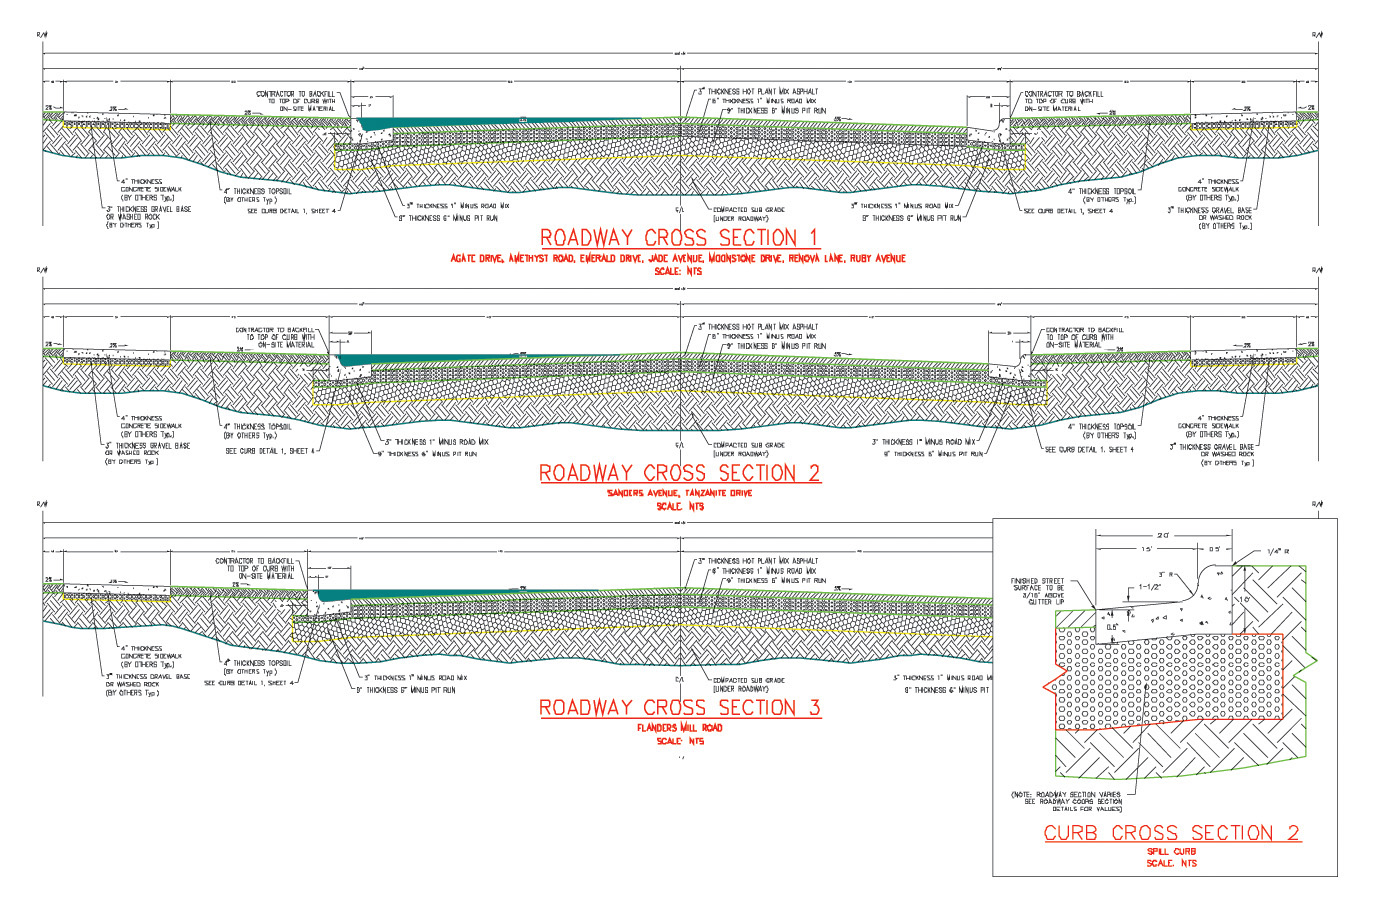 Drawings of three roadway cross-sections and a curb cross-section is shown with all the details labeled.